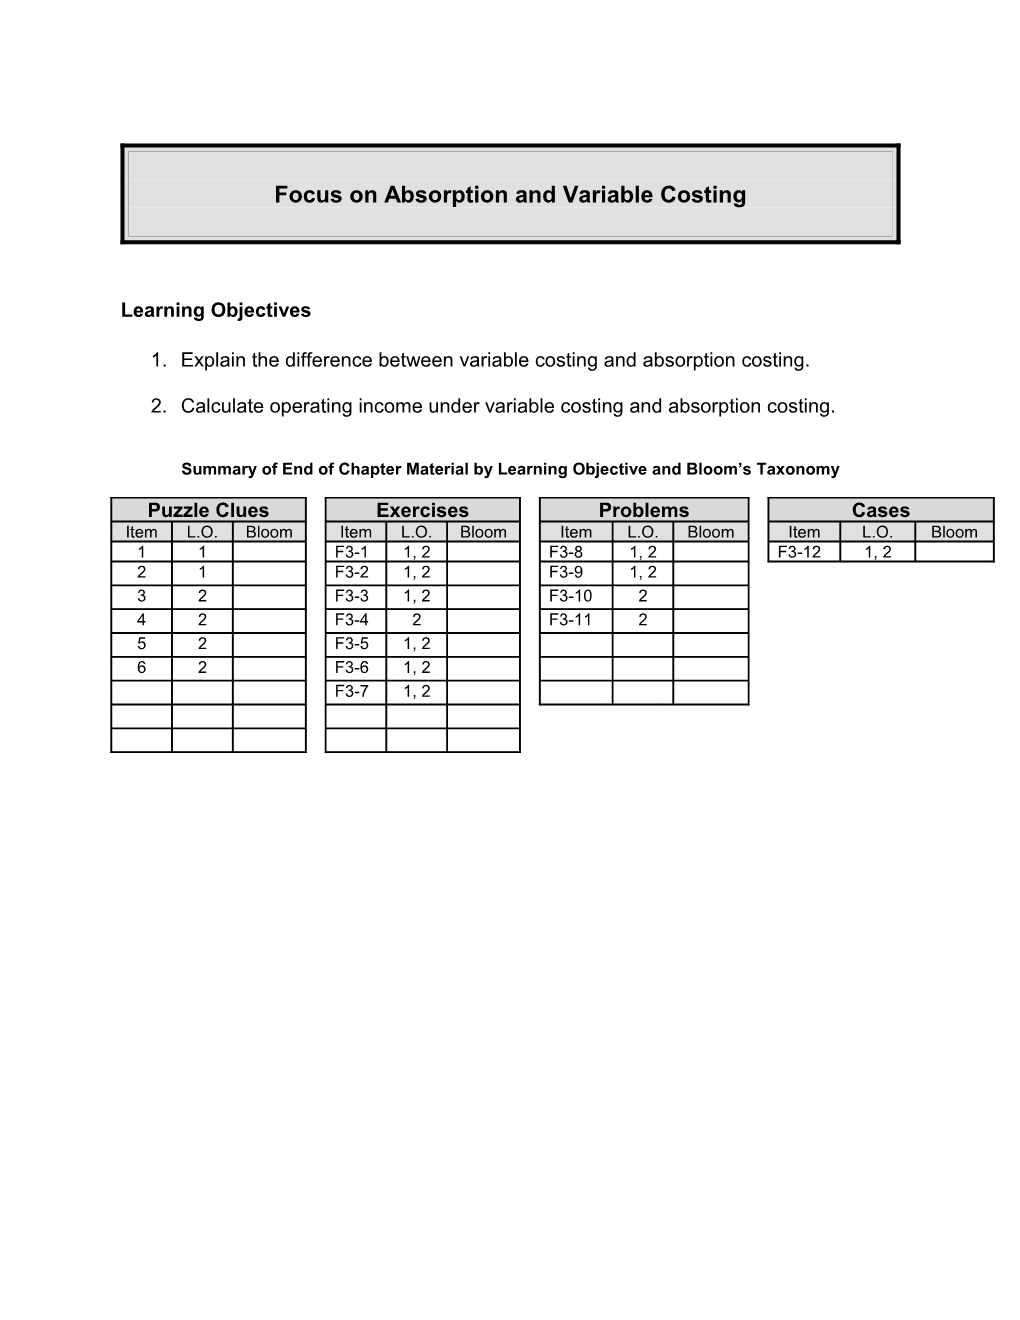 Focus on Absorption and Variable Costing